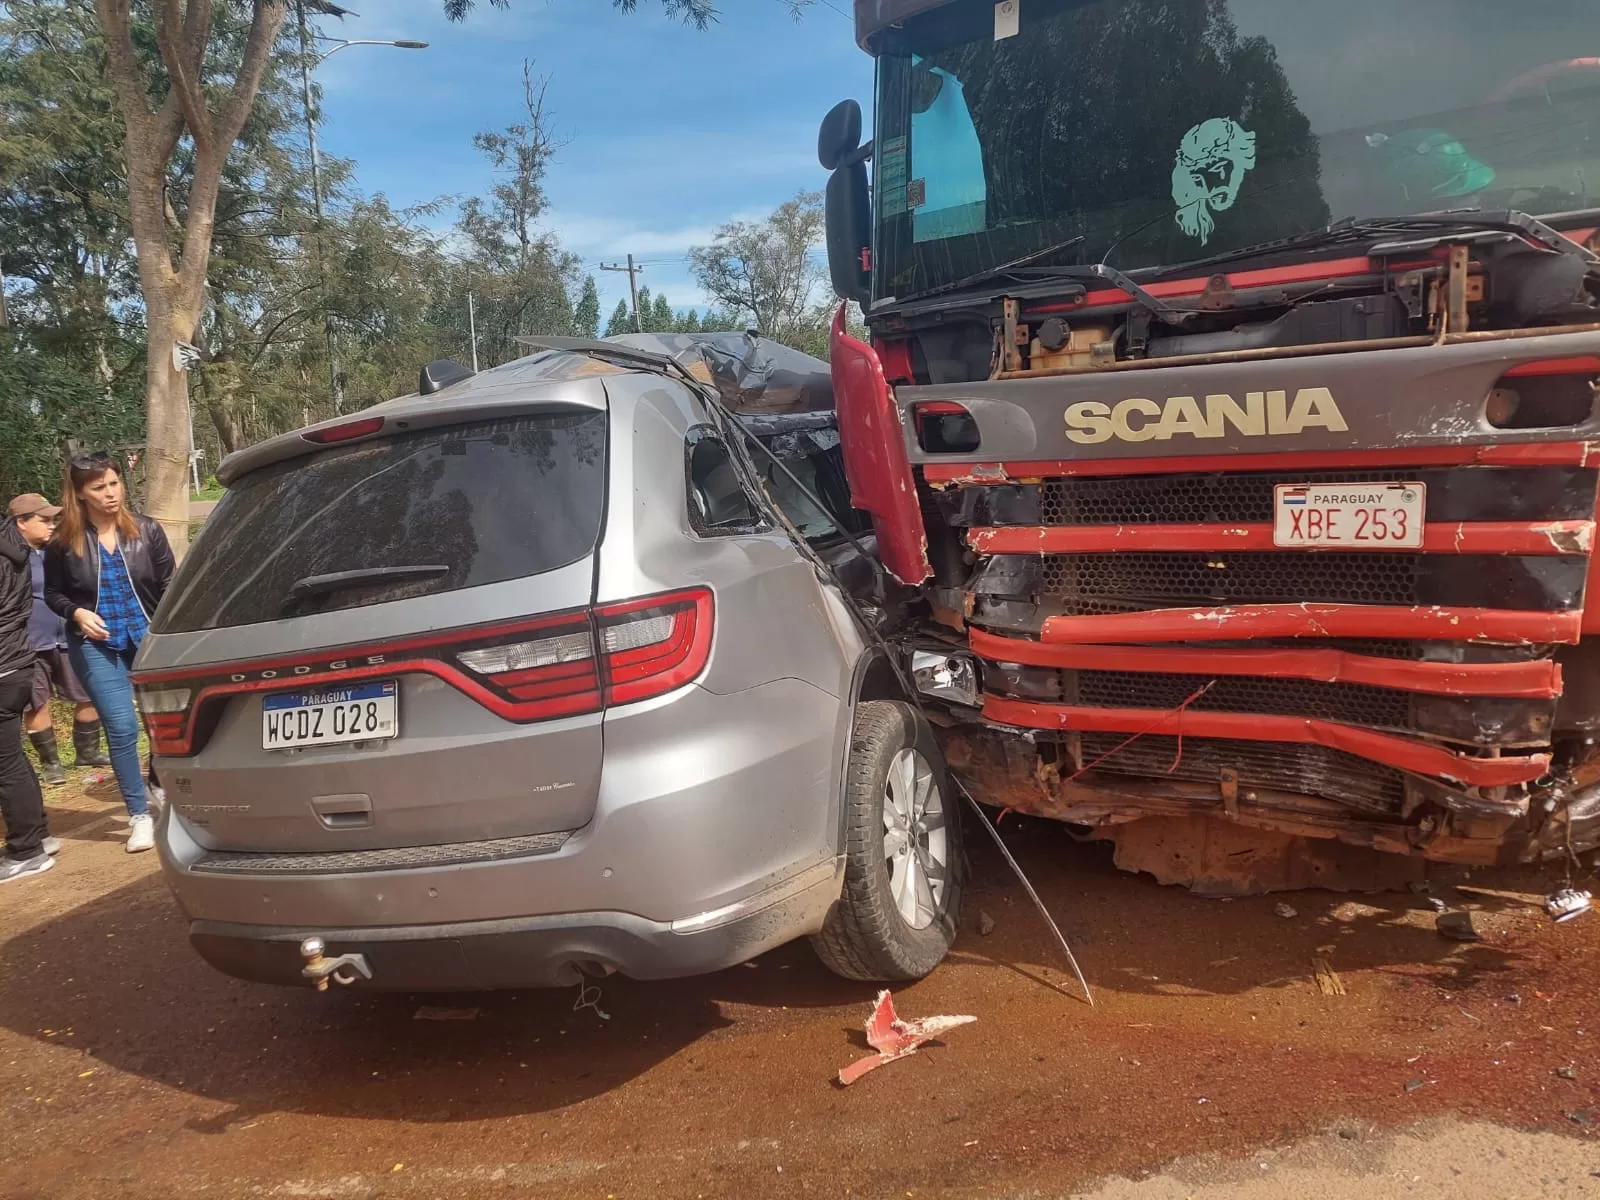 Fatal accident at Tebicuary crossing: truck collided with a Scania
